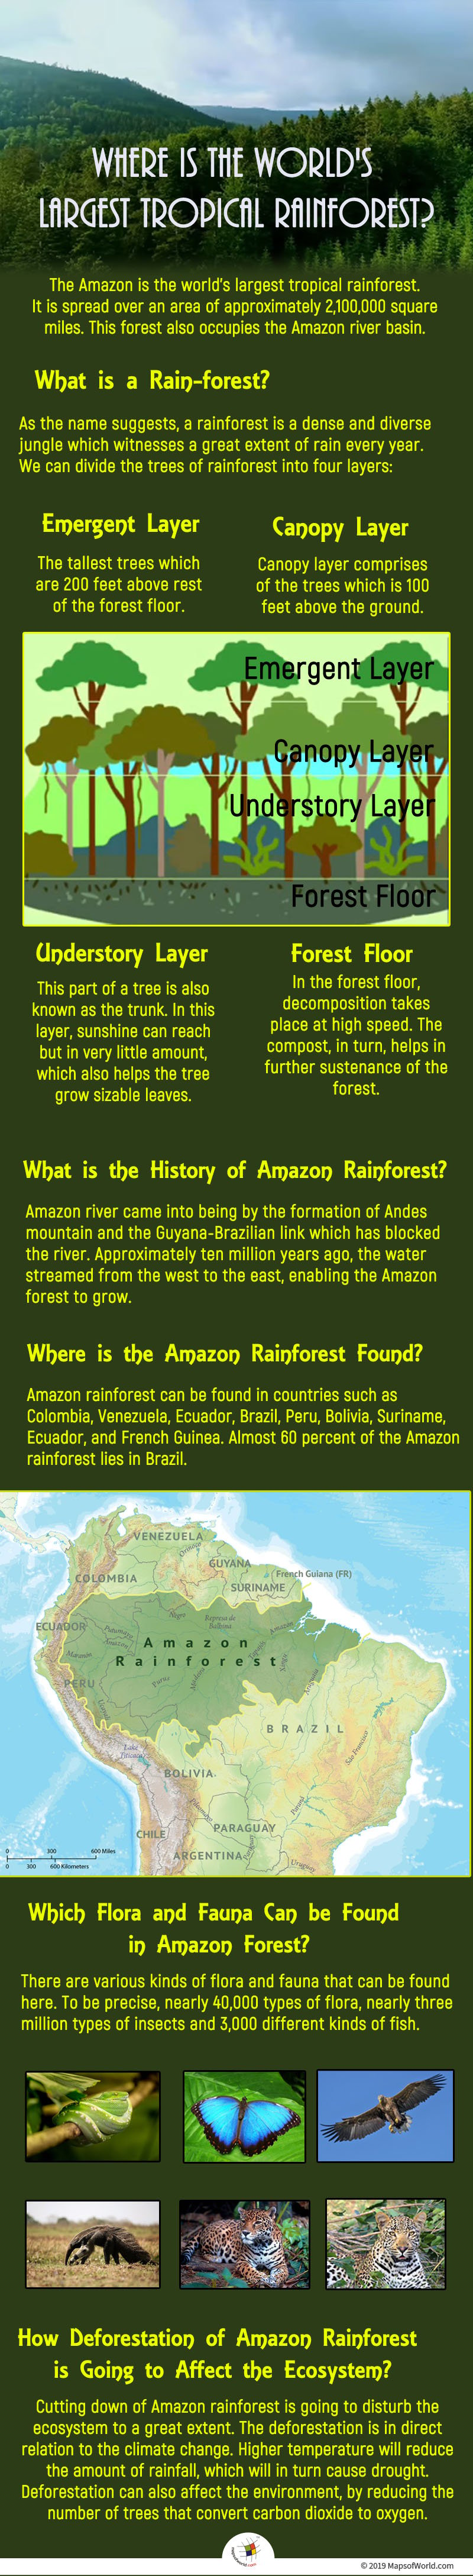 The Amazon is the world's largest tropical rainforest